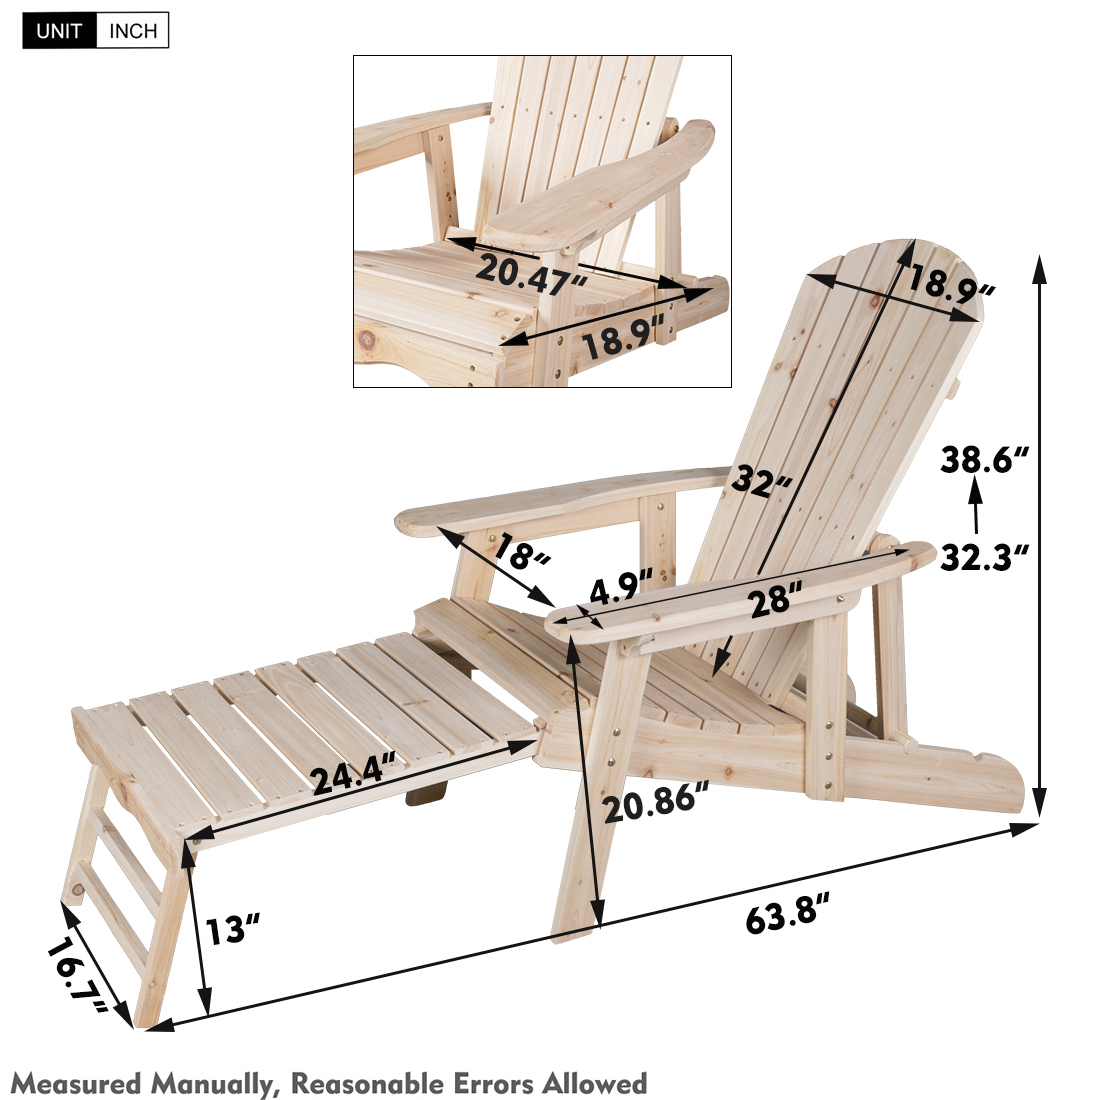 SNAIL Cedar/Fir Log Wood Fanback Adirondack Chair with Pull-Out Ottoman, Outdoor Lounge Furniture for Patio Lawn Garden Backyard Beach Porch Balcony, Large Wooden Adirondack Chair, Natural Finish - image 5 of 10